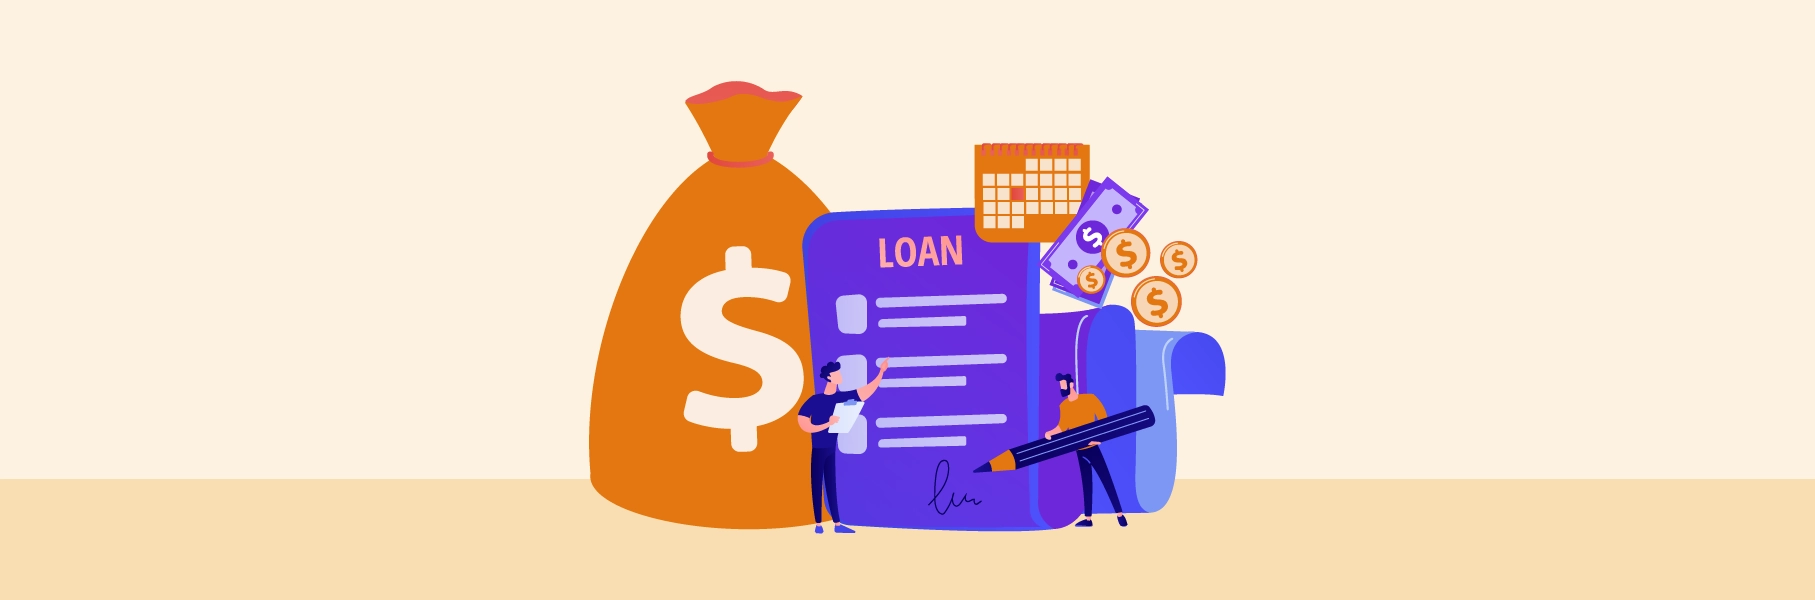 Getting a Prodigy Finance loan - what you need to know? Image